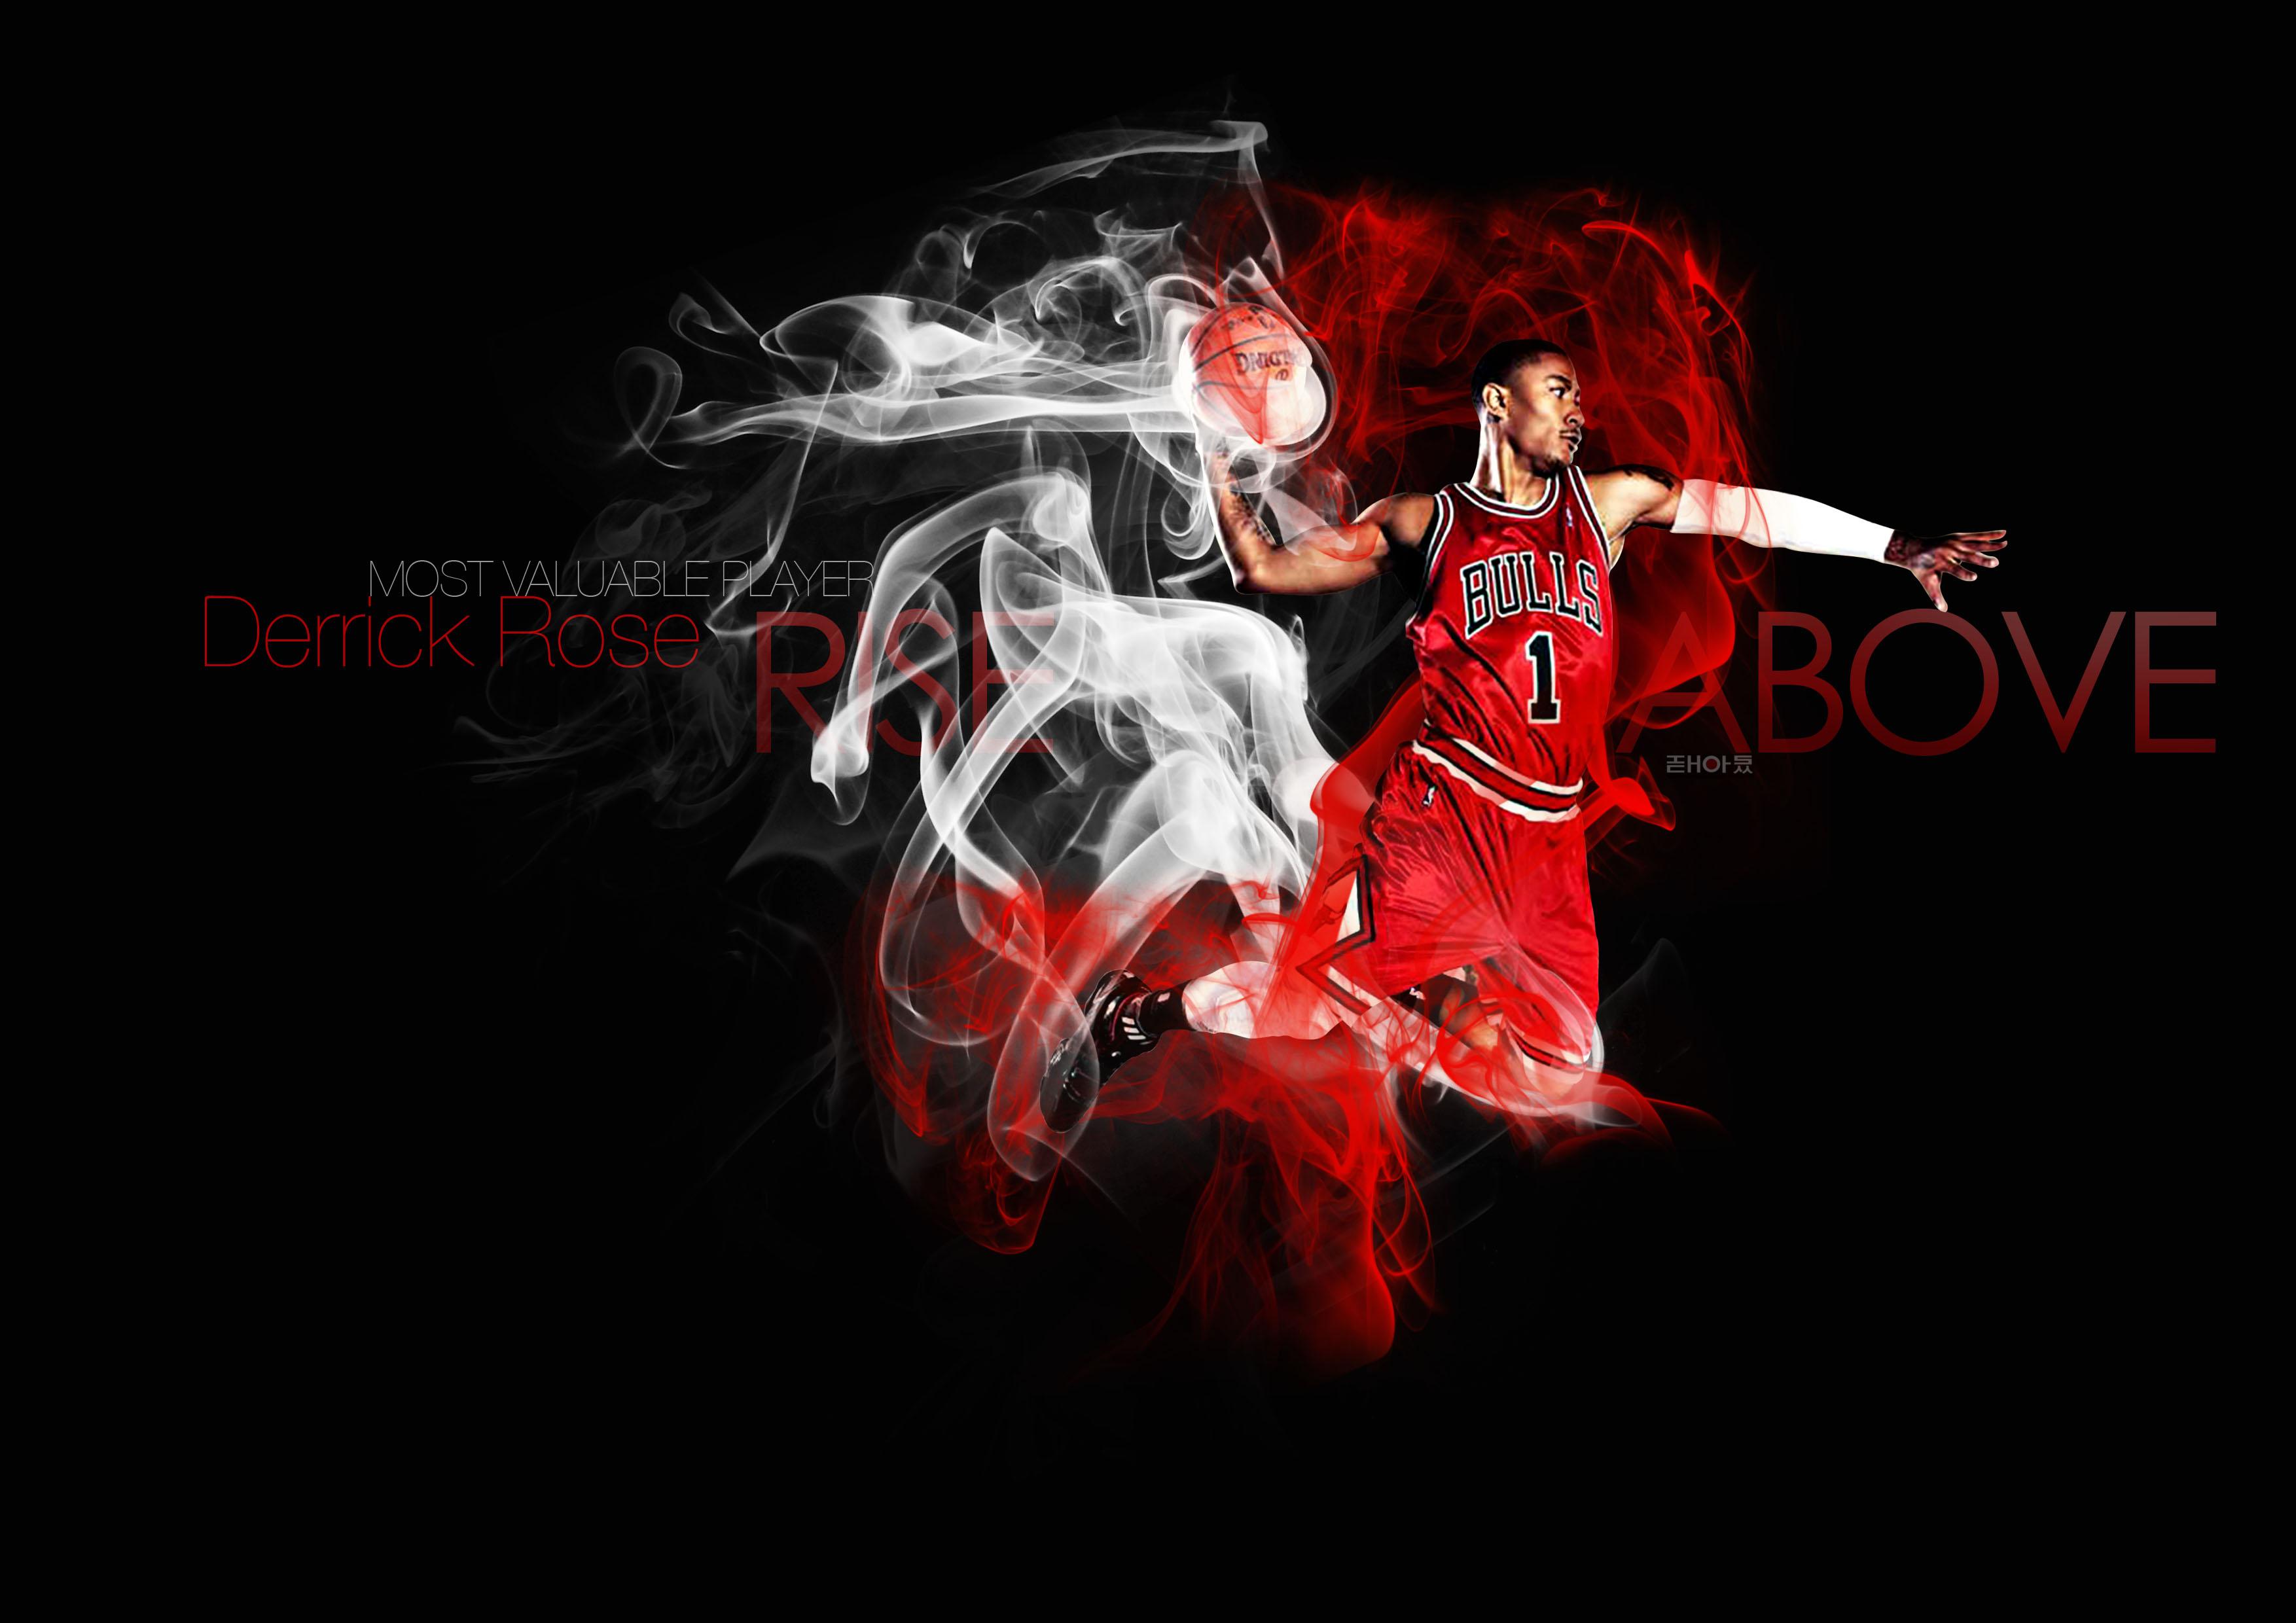 Derrick Rose Most Valuable Player by ichoism 3508 x 2480